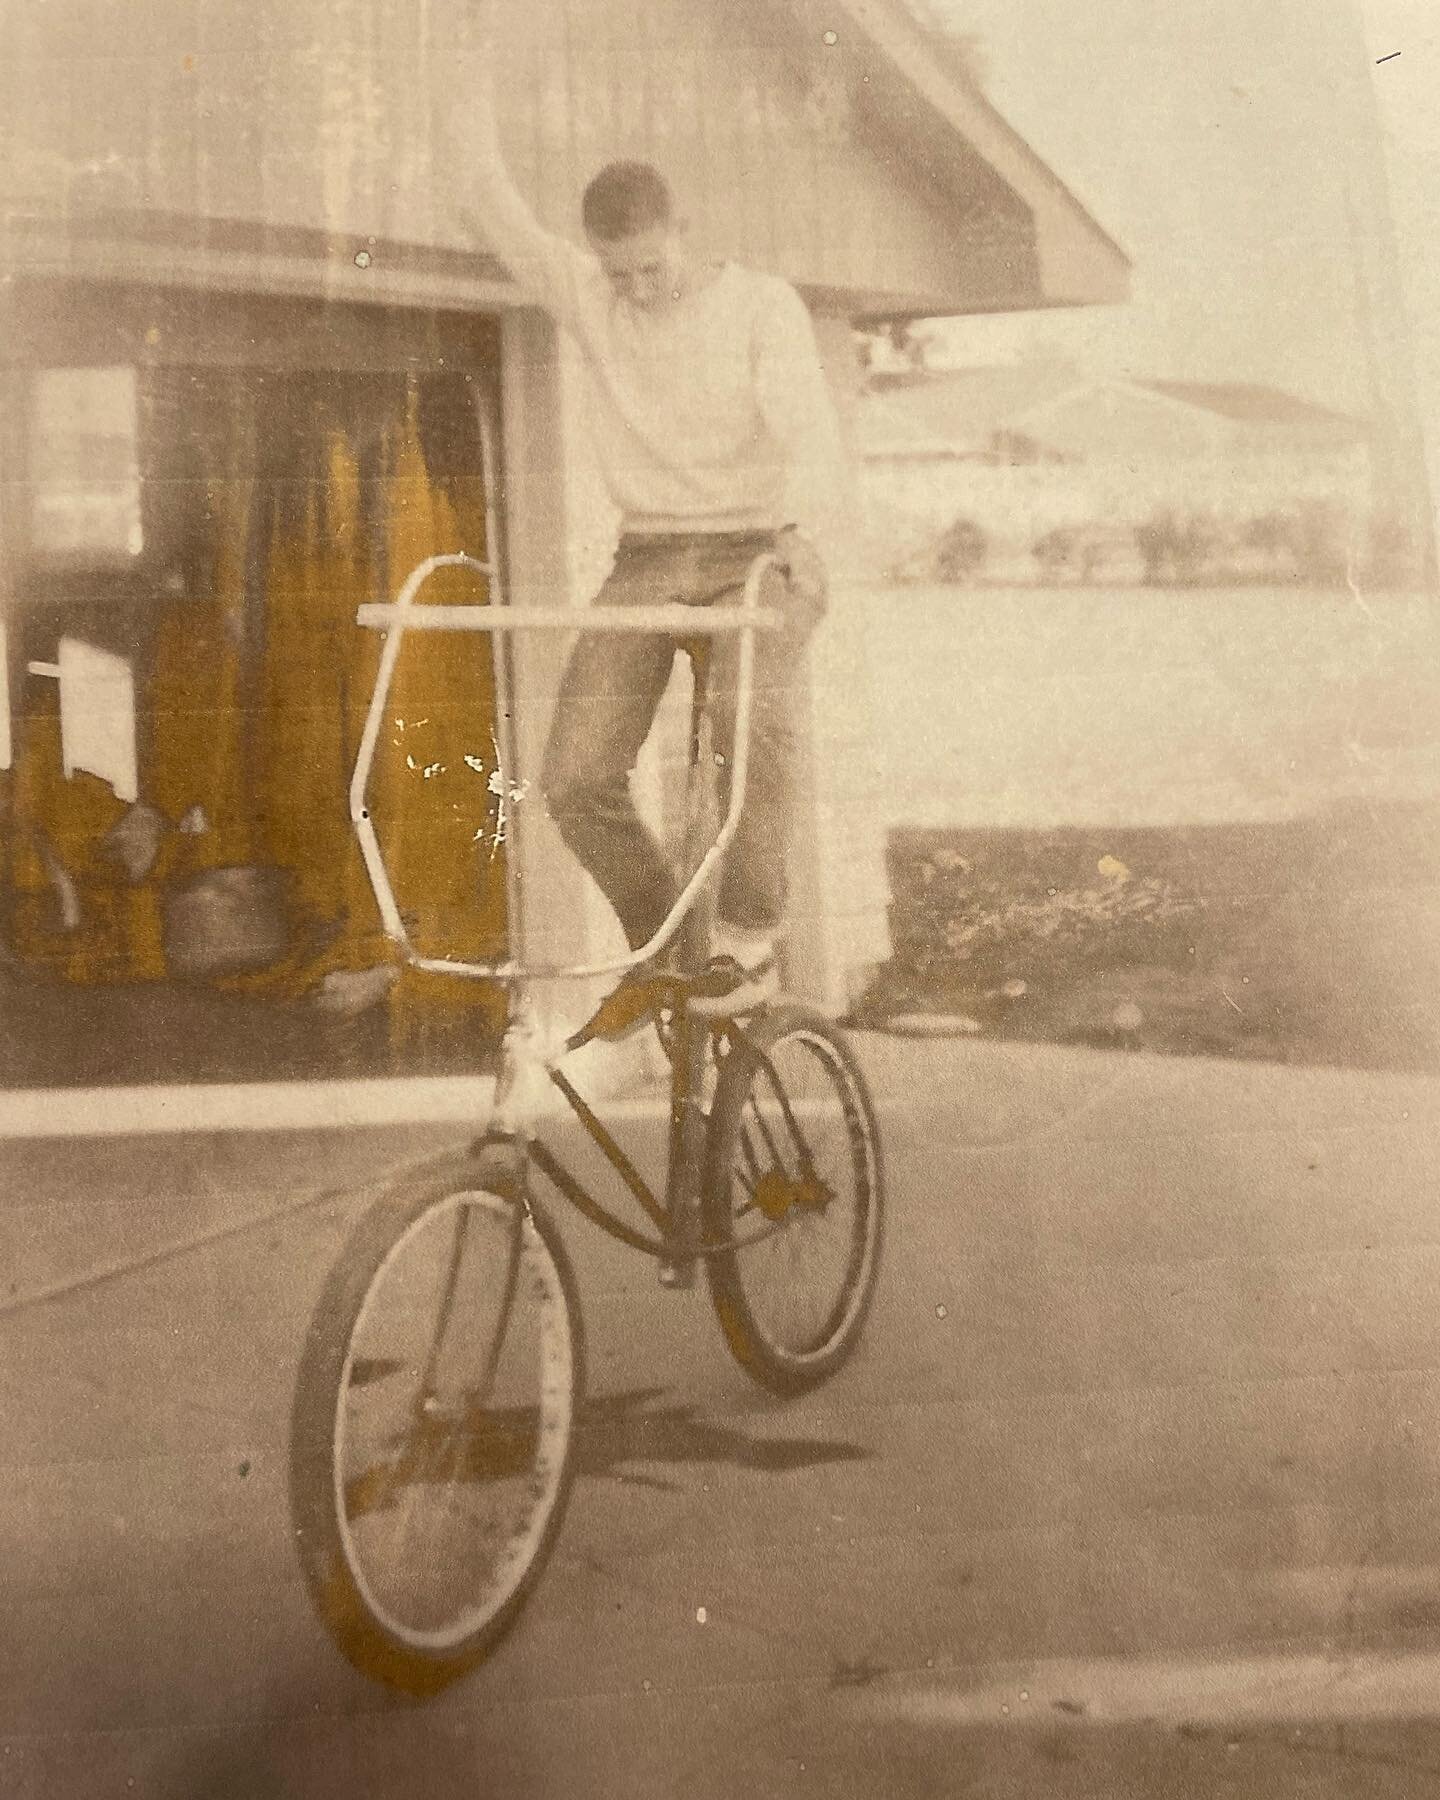 Ralph picked up this Schwinn Leader new back in 1951. Like many of us, he took his bike apart and put it back together, often in different orientations&hellip; 

In this orientation he flipped the frame upside down, built a stilt for his saddle and m